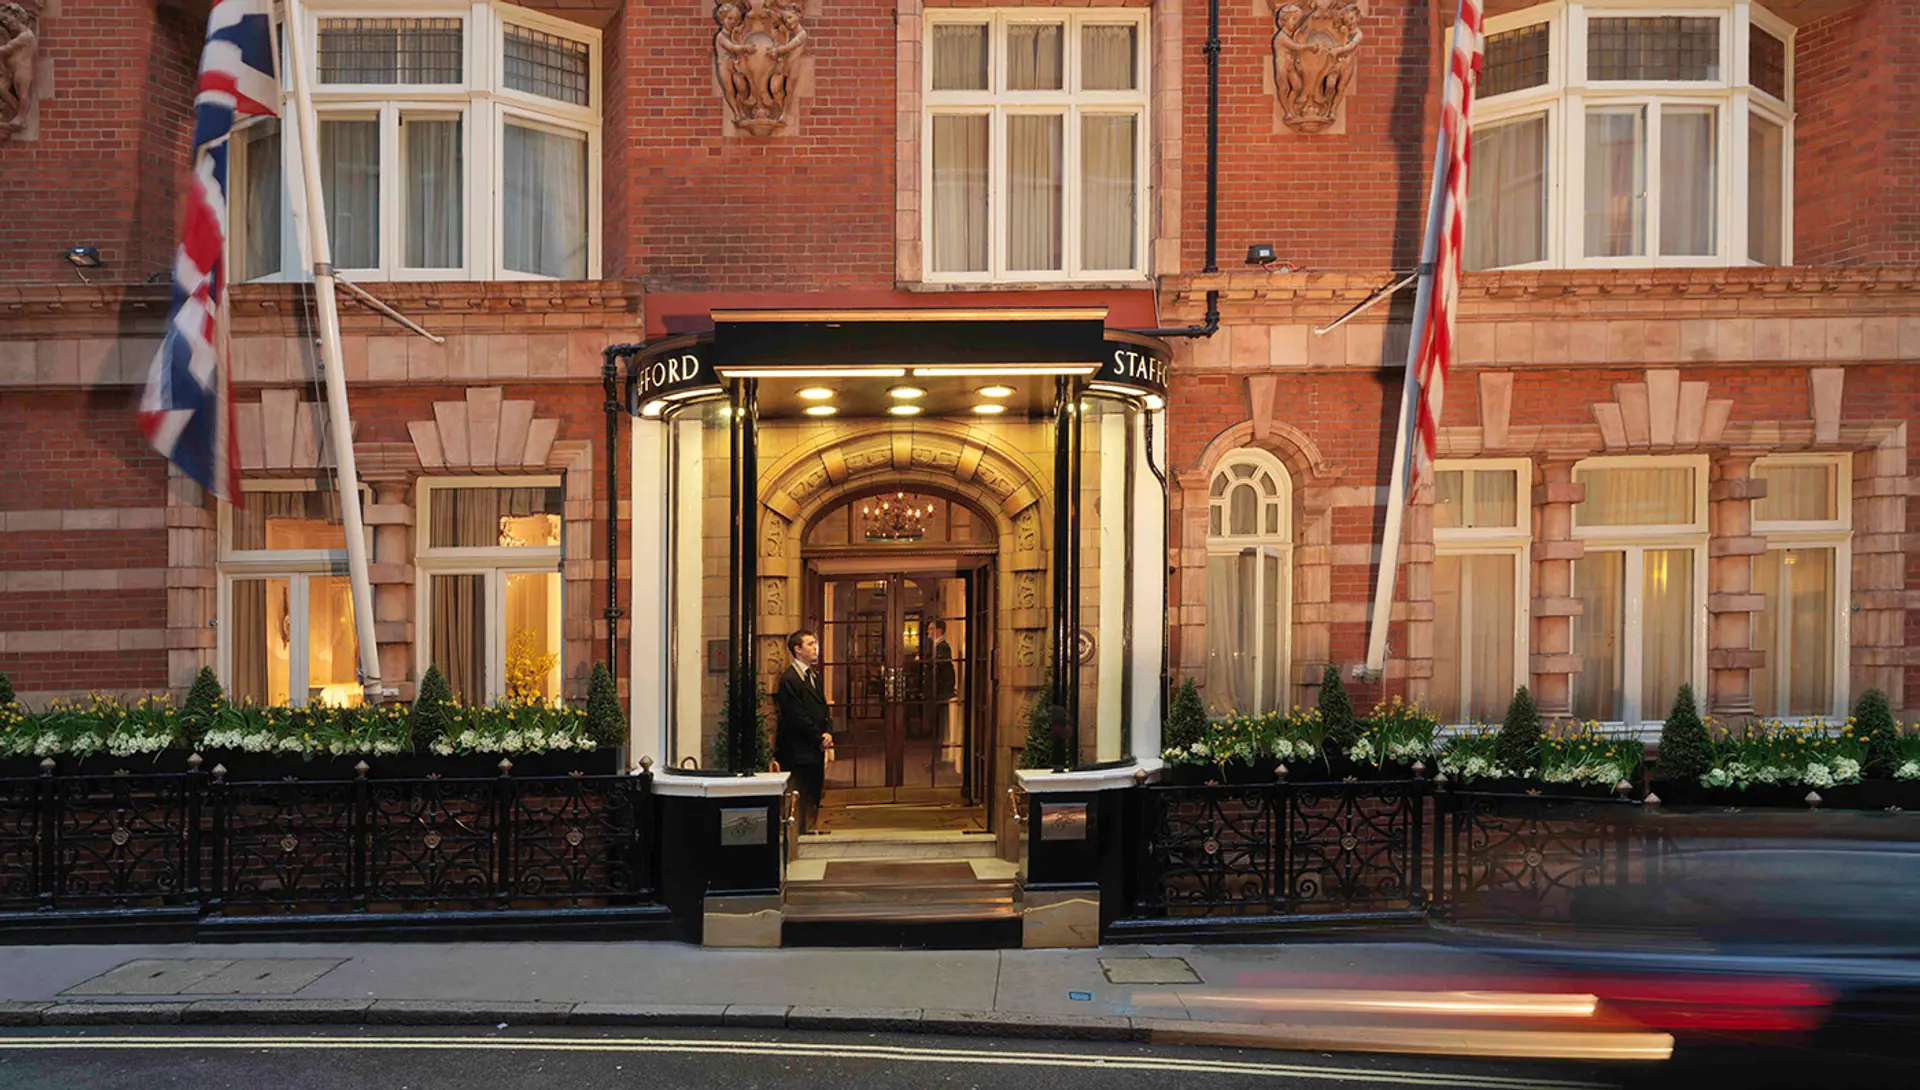 Hotel review Location' - The Stafford London - 2